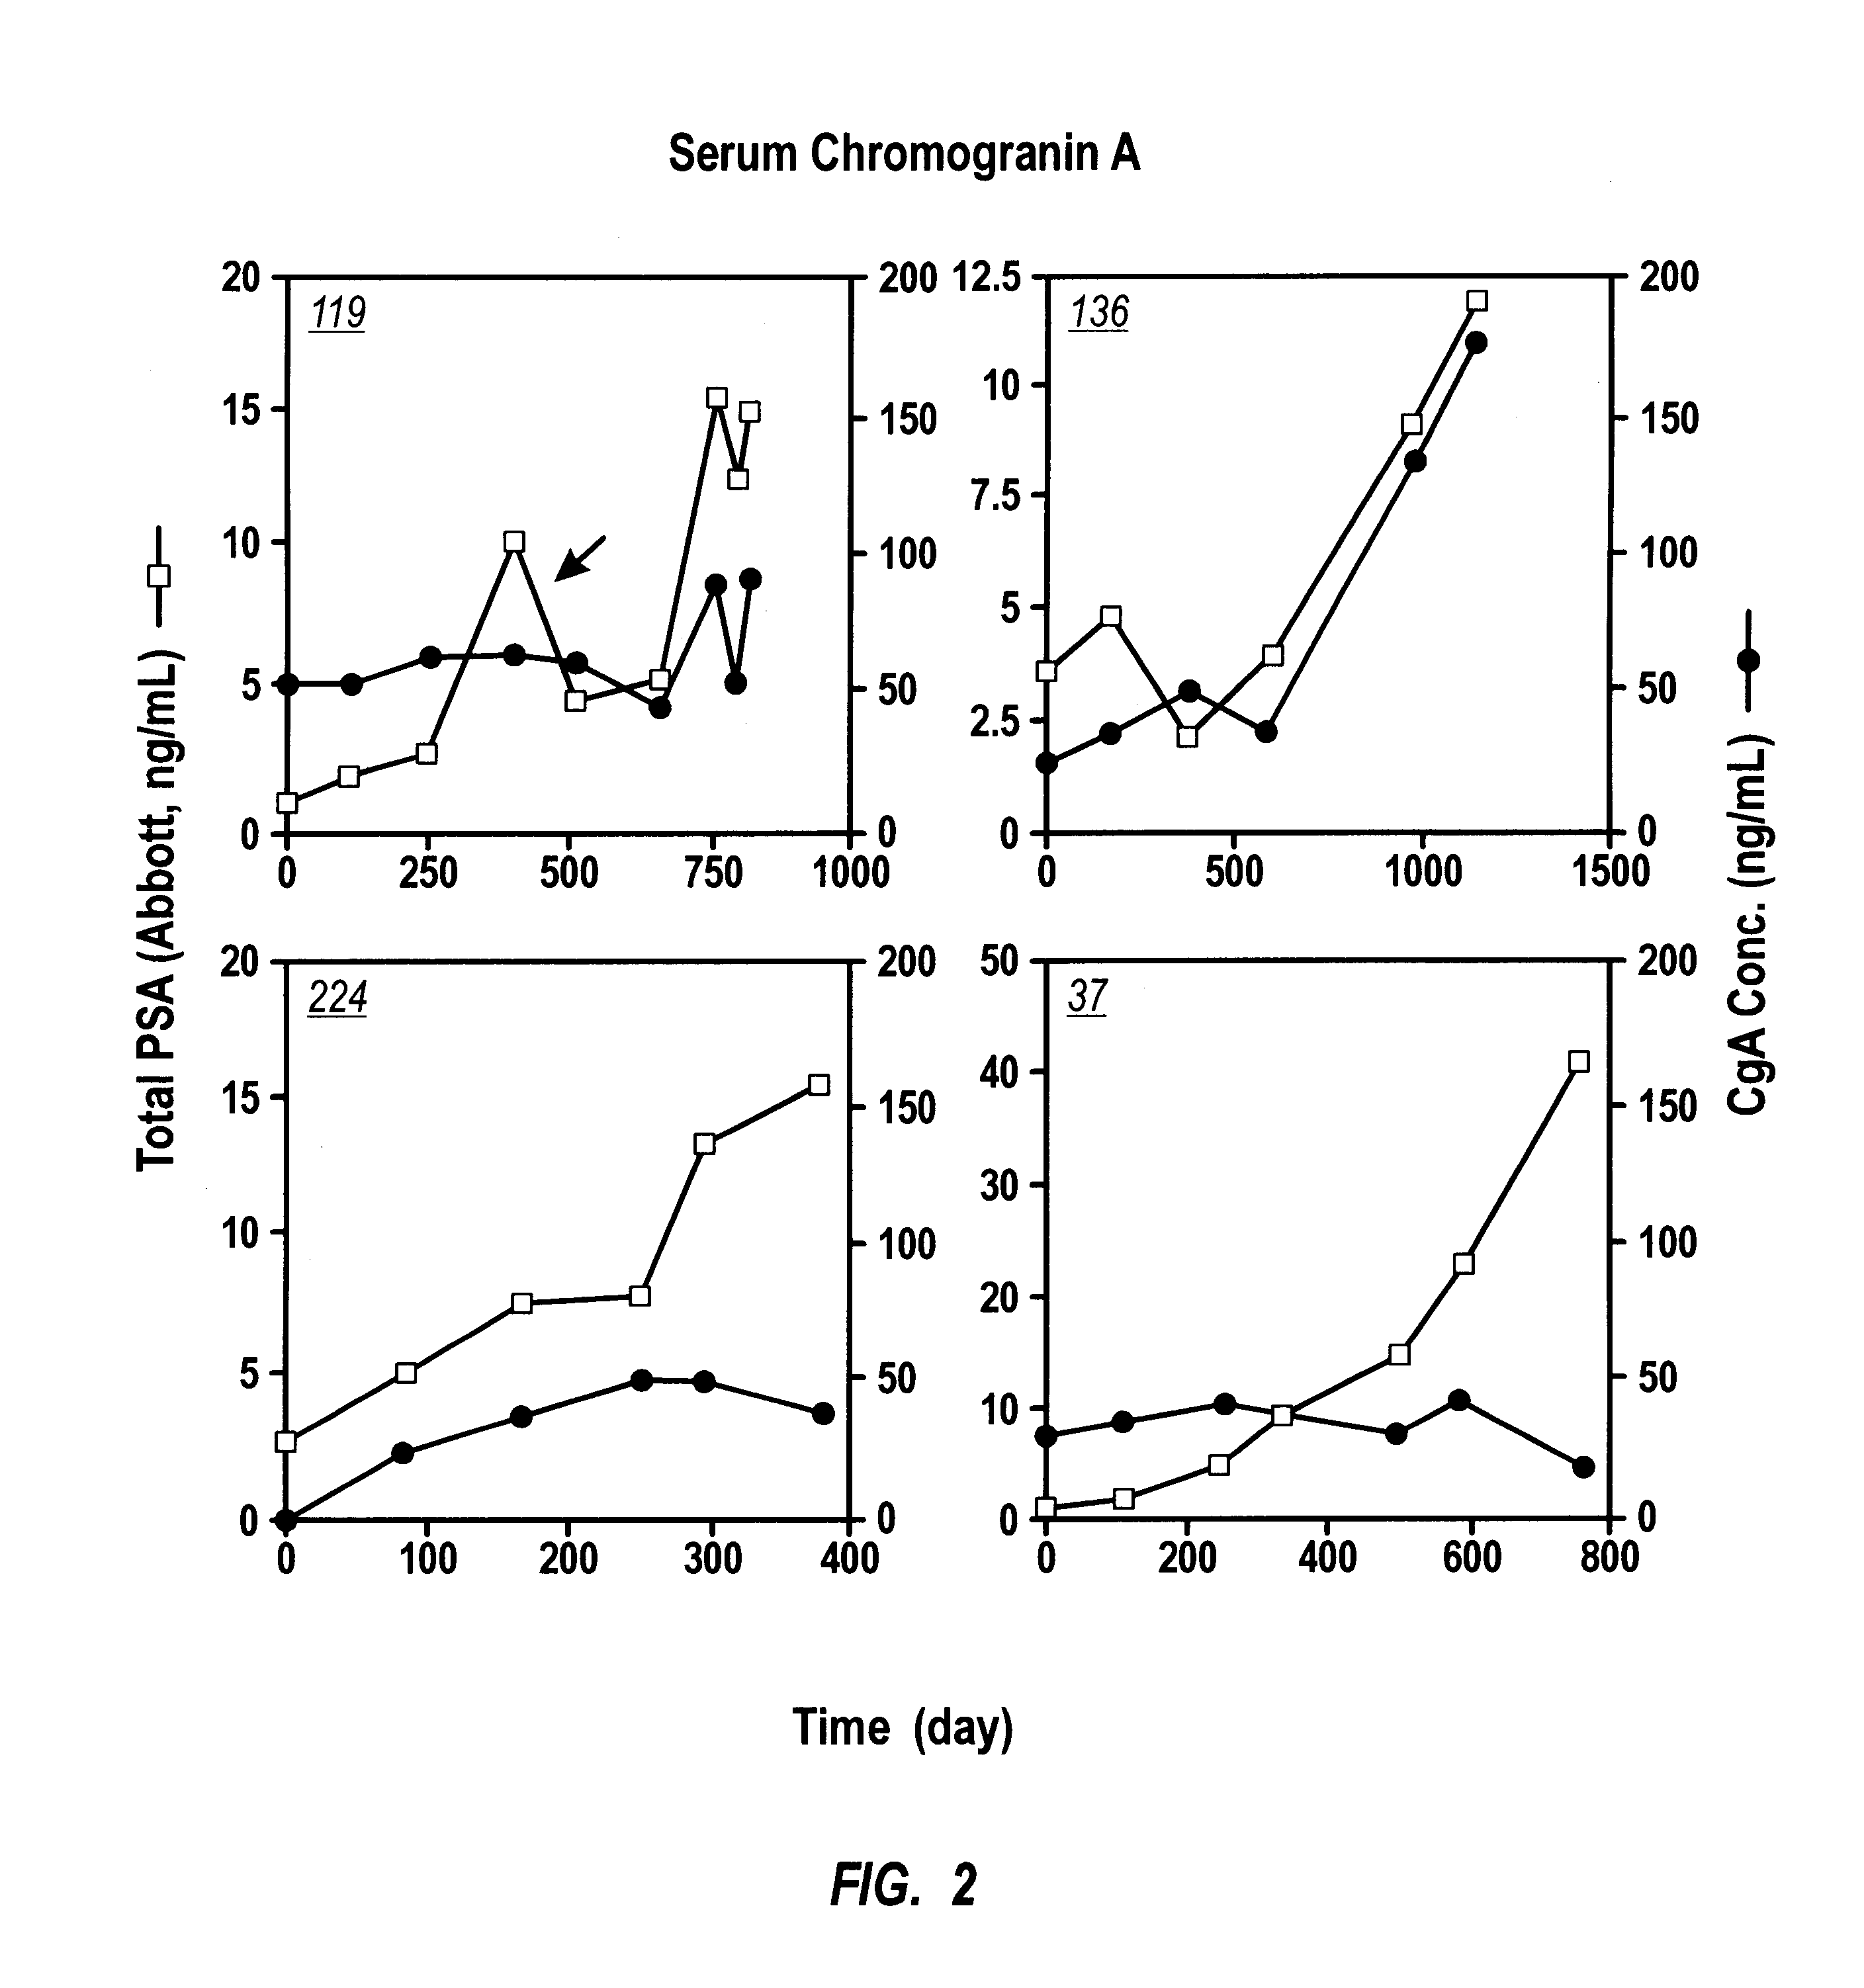 Method for prediction prostate cancer patients' resistance to hormonal treatment by measuring serum concentrations of chromogranin A